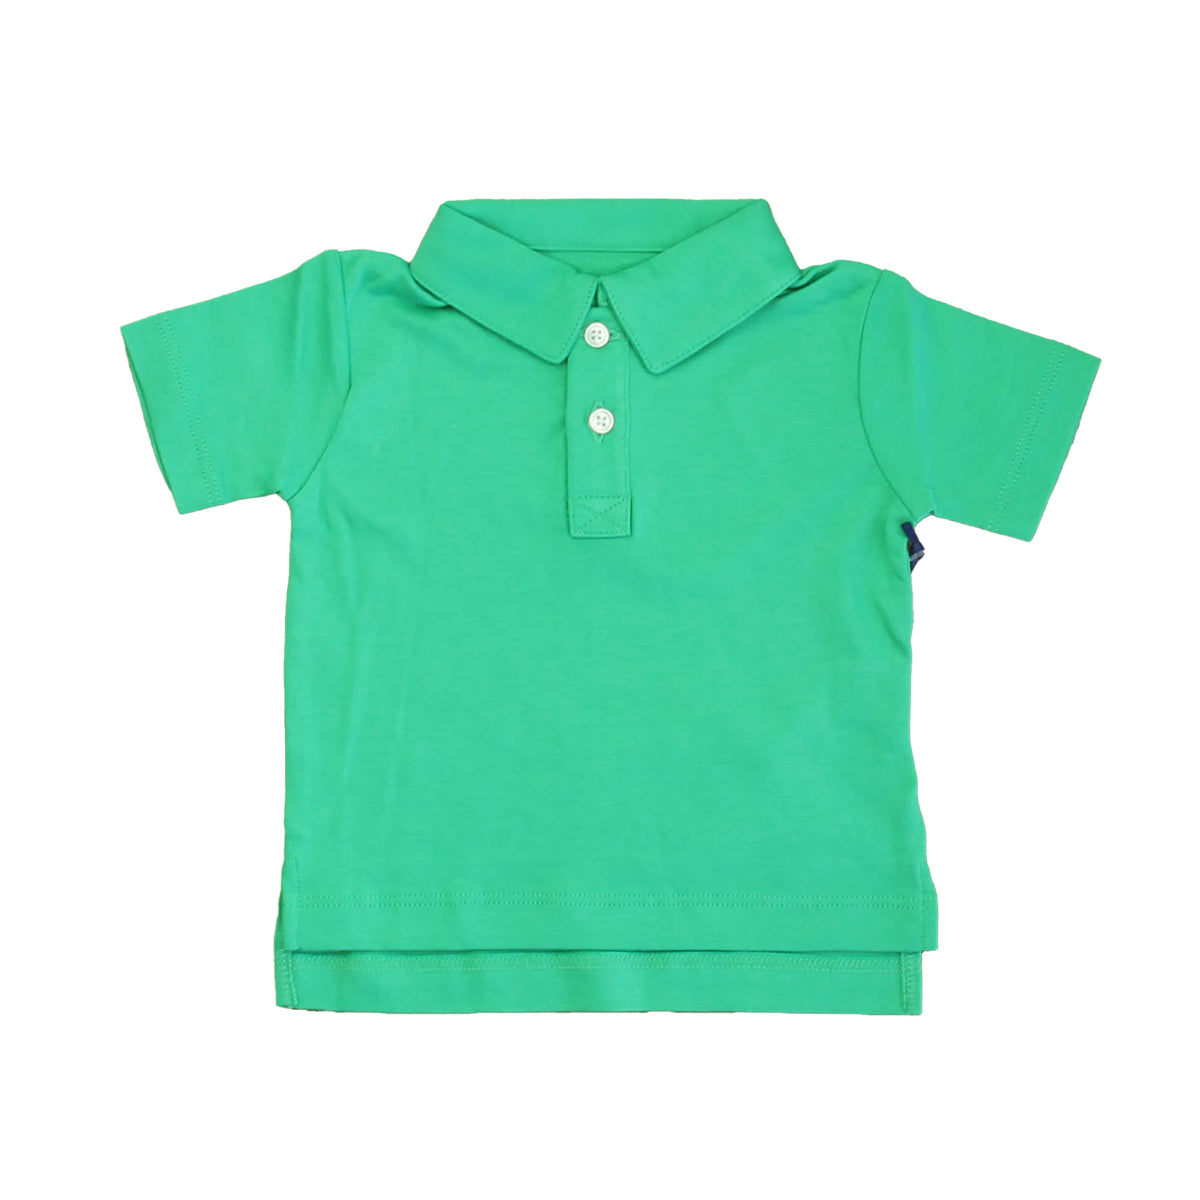 New with Tags: Blarney Green Top -- FINAL SALE